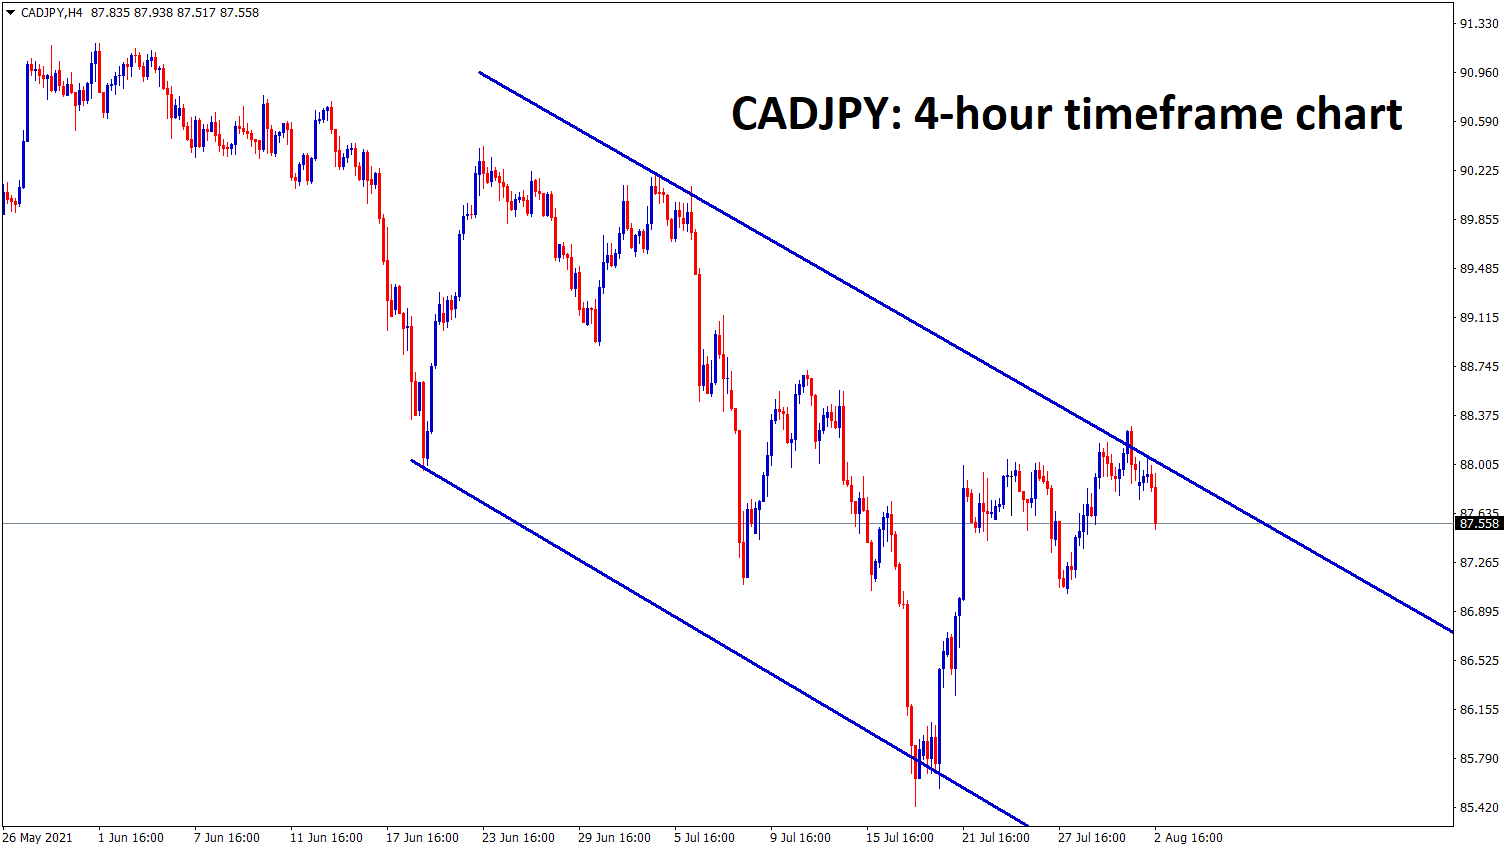 CADJPY is falling from the lower high zone of the descending channel range